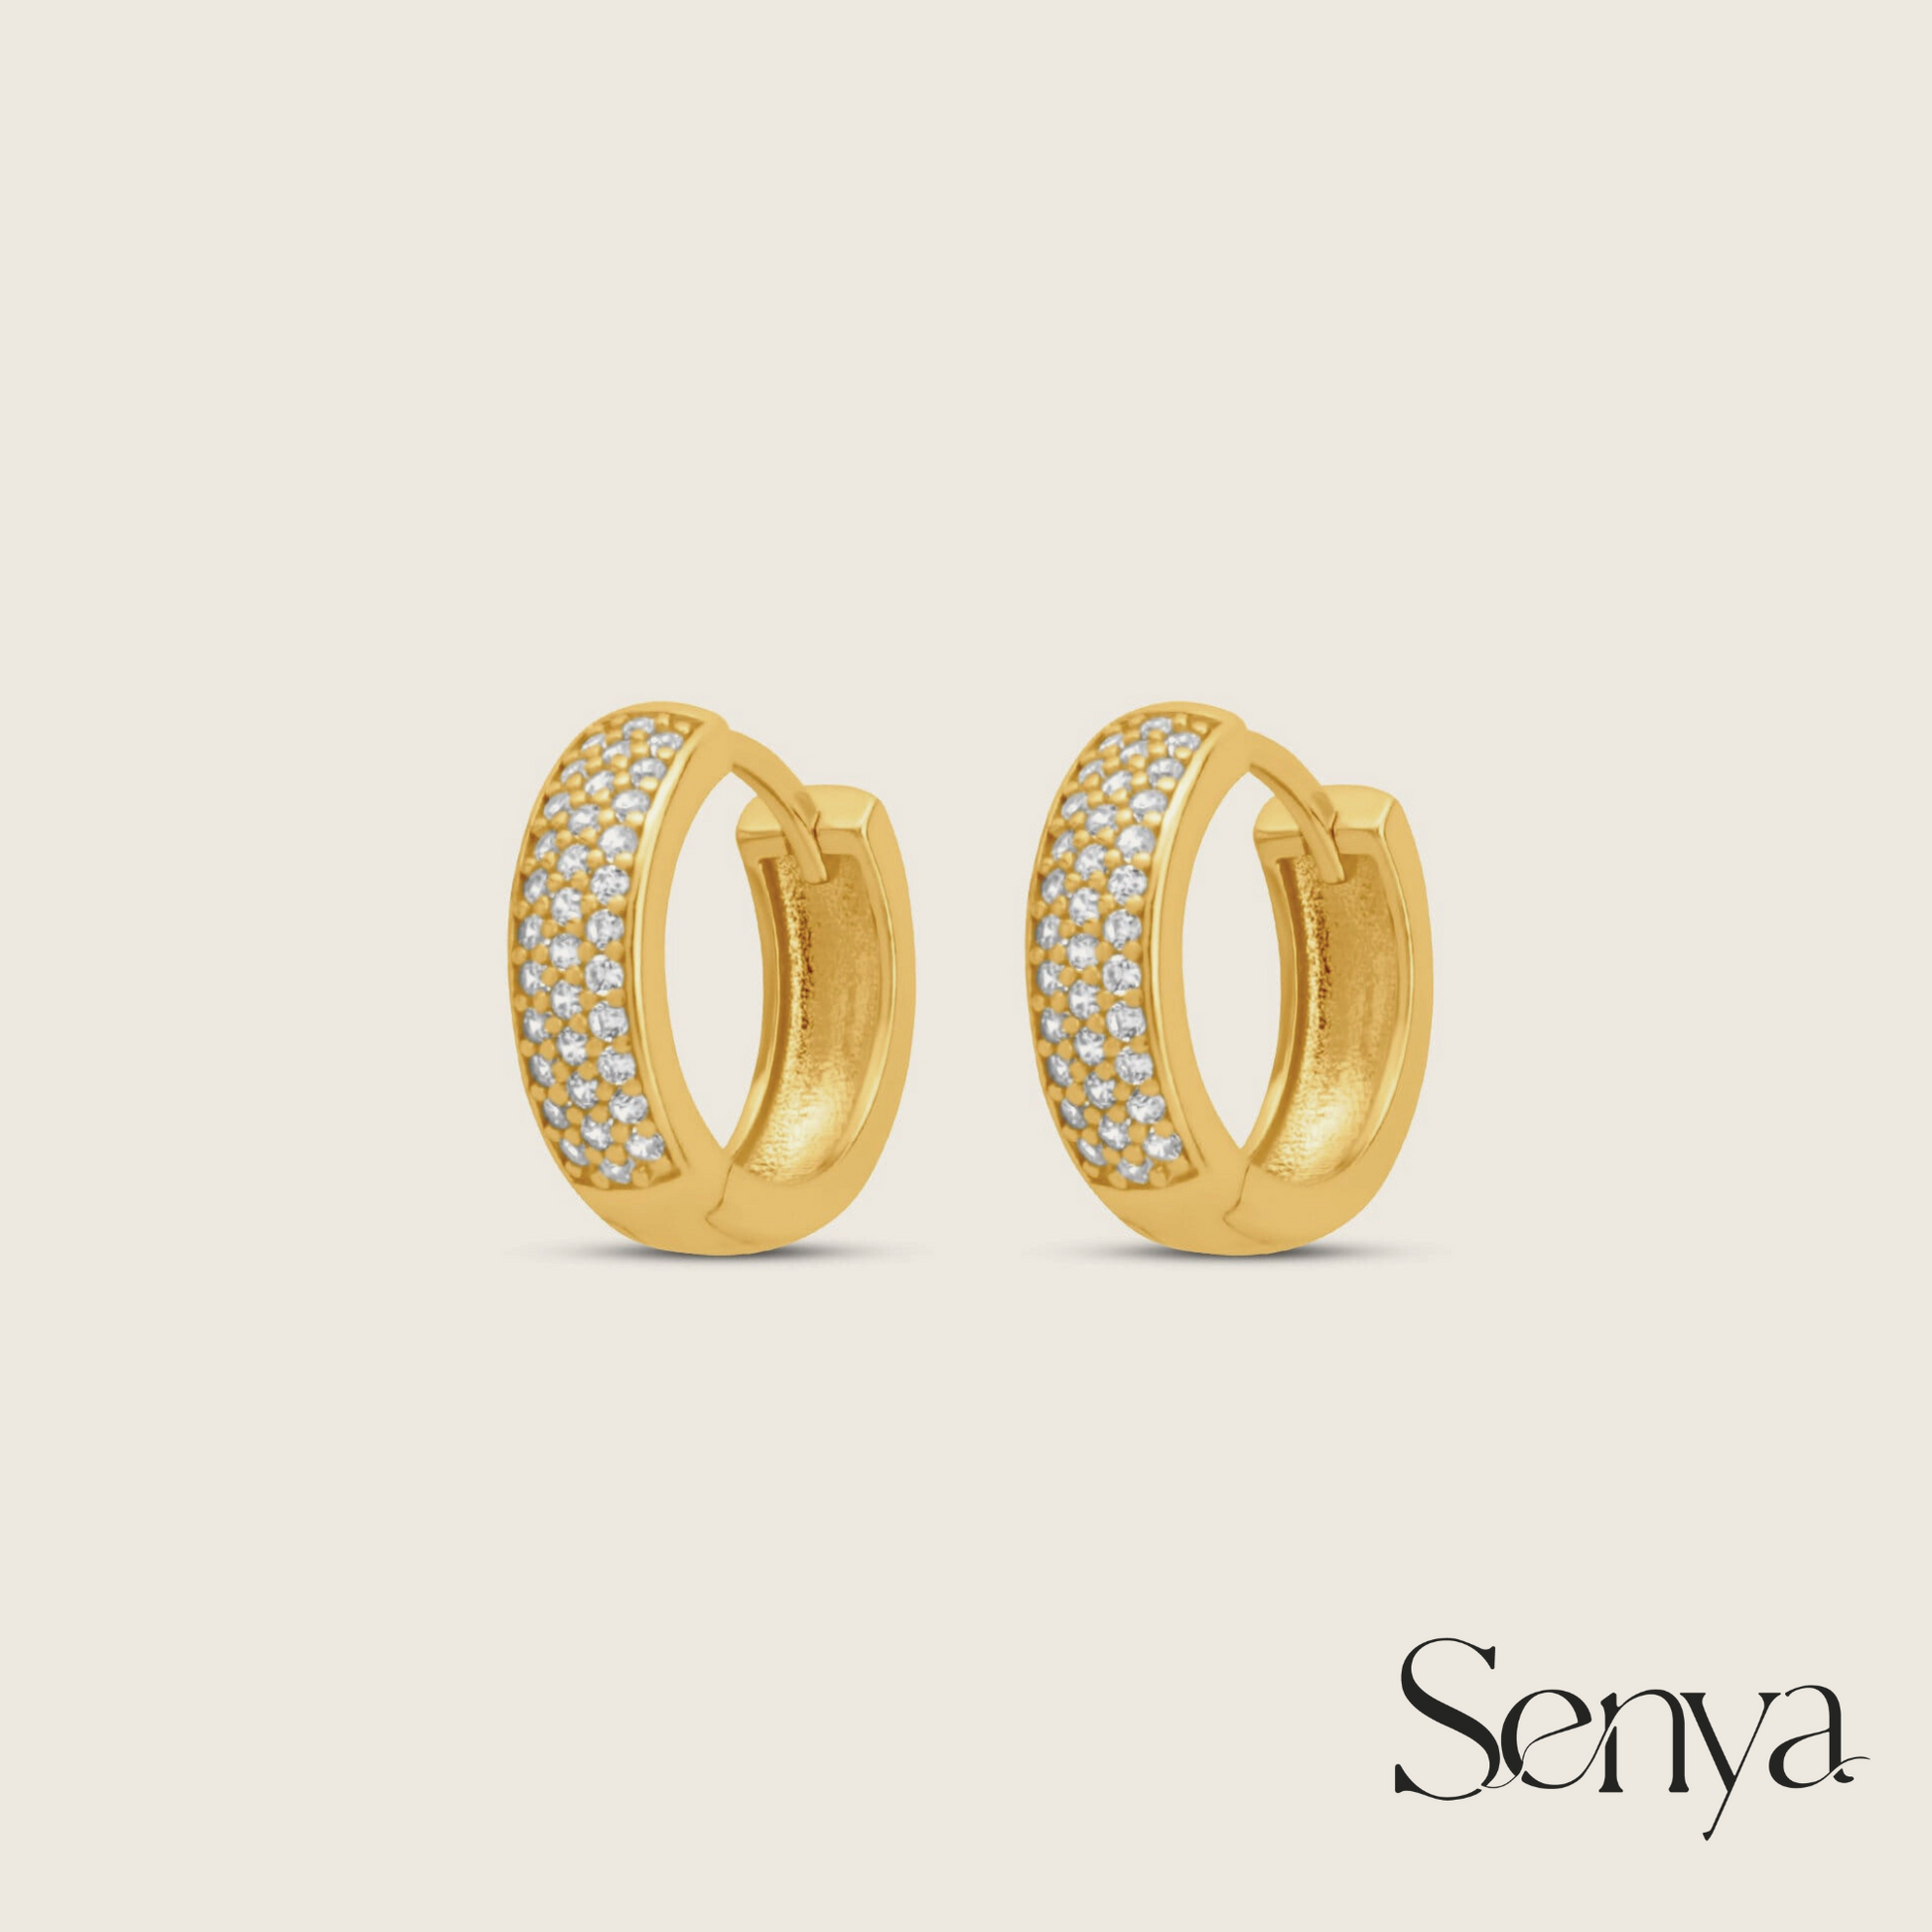 Round earrings with intricate zirconia detailing, Sterling silver hoop earrings with 18k gold plating, Round bold hoops with tiny gemstone adornments, Silver earrings with petite zirconia embellishments, Bold hoop earrings with 925 sterling silver,